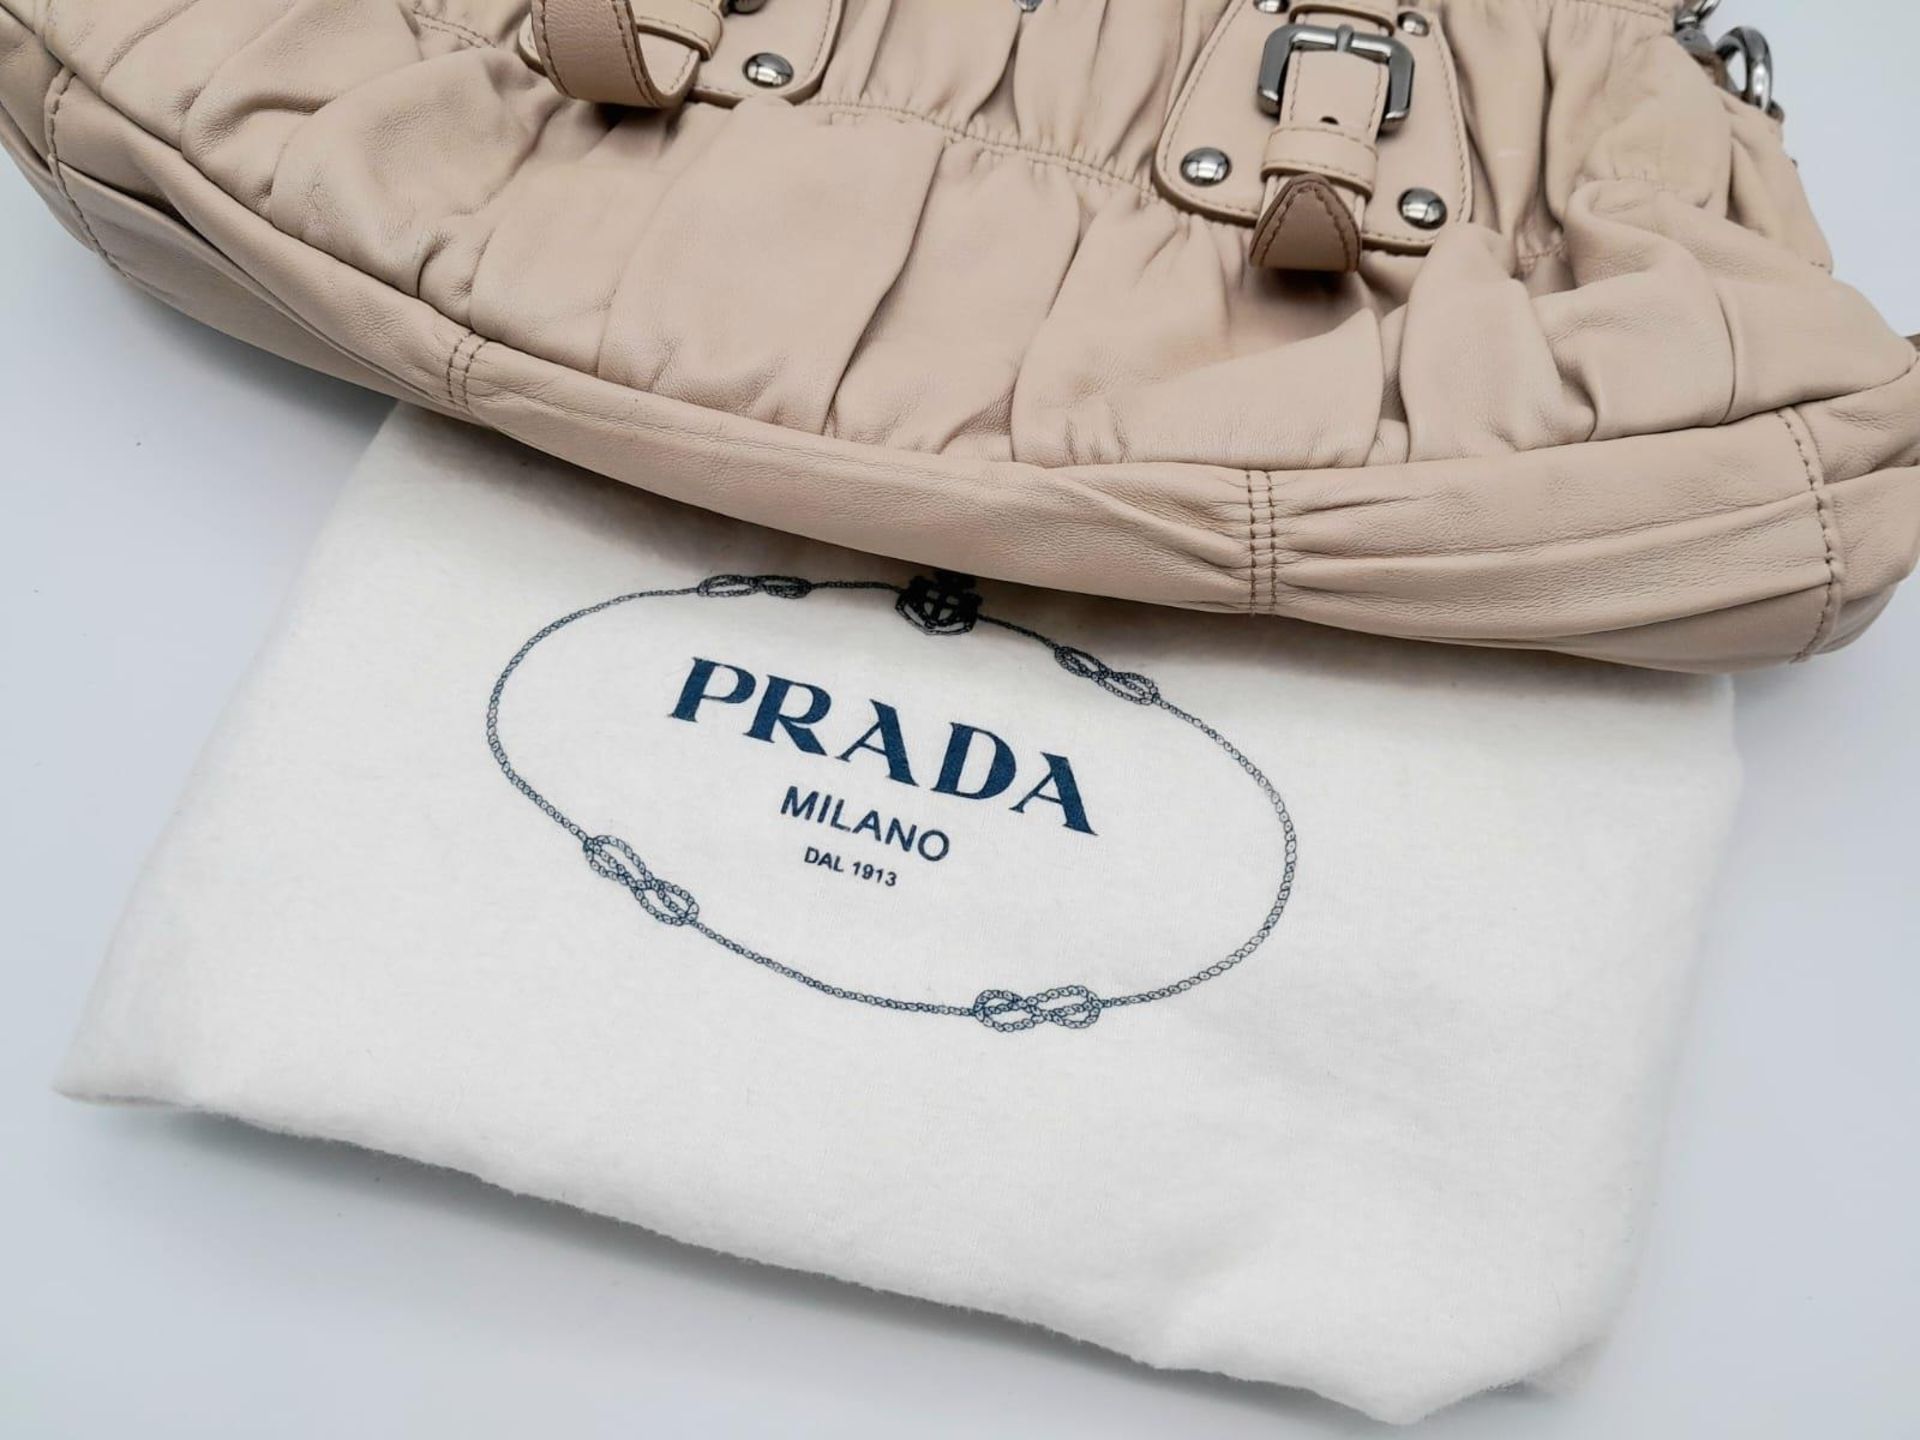 A PRADA BEIGE NAPPA LEATHER GAUFRE POMICE TOTE BAG. SILVER TONE HARD WEAR INCLUDING BUCKLE DETAIL. - Image 24 of 27